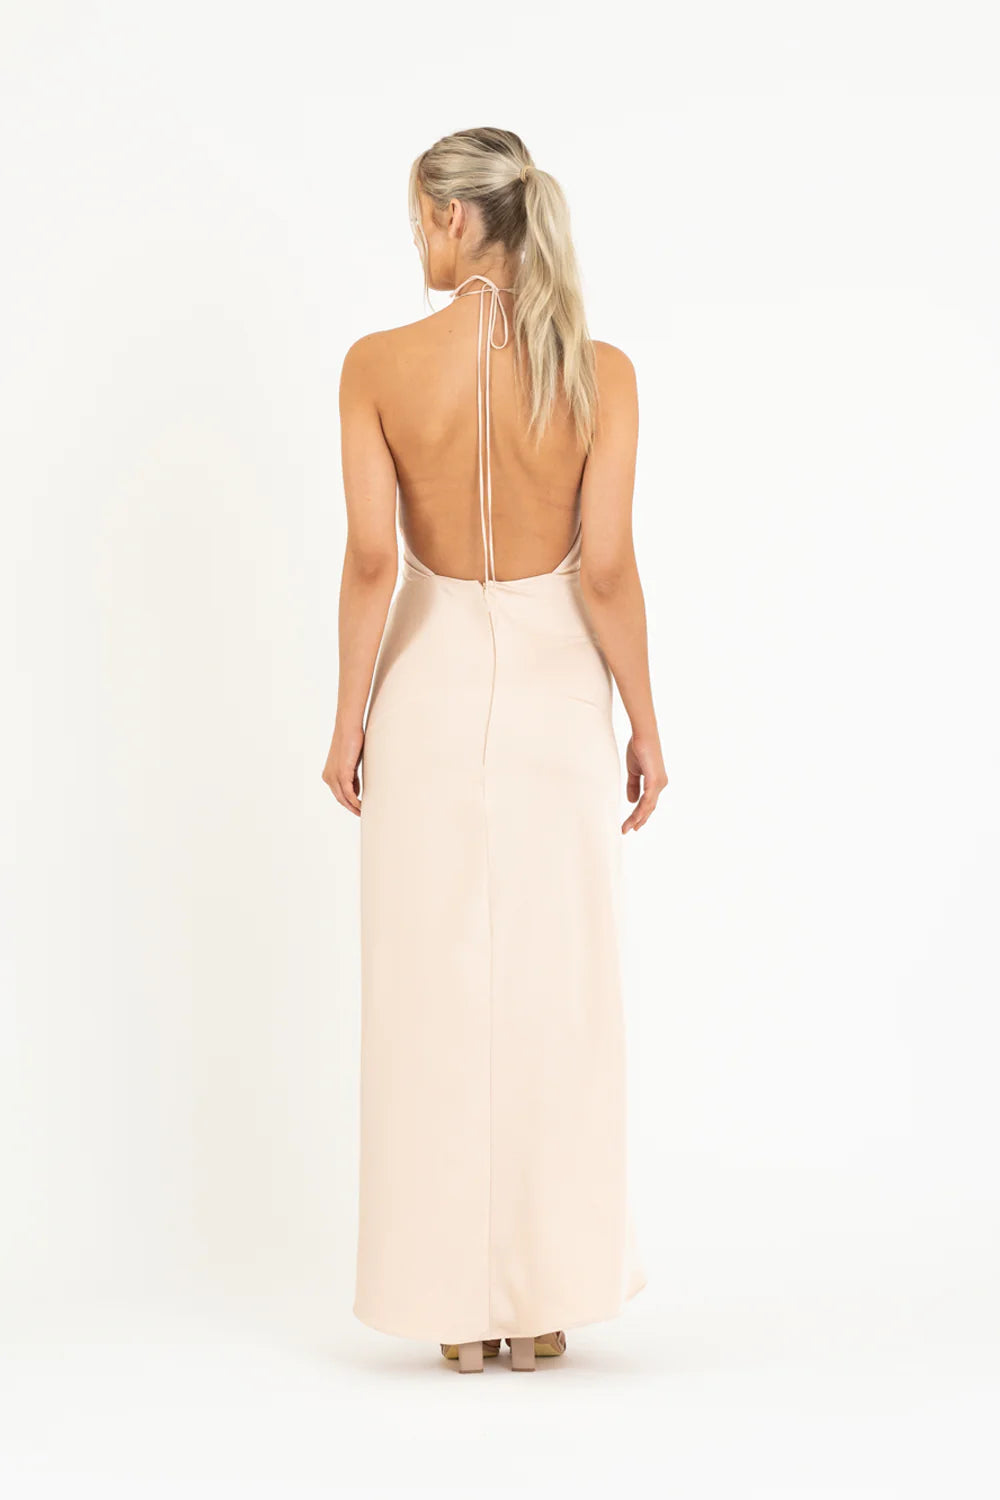 One Fell Swoop Zion Maxi, Magnolia